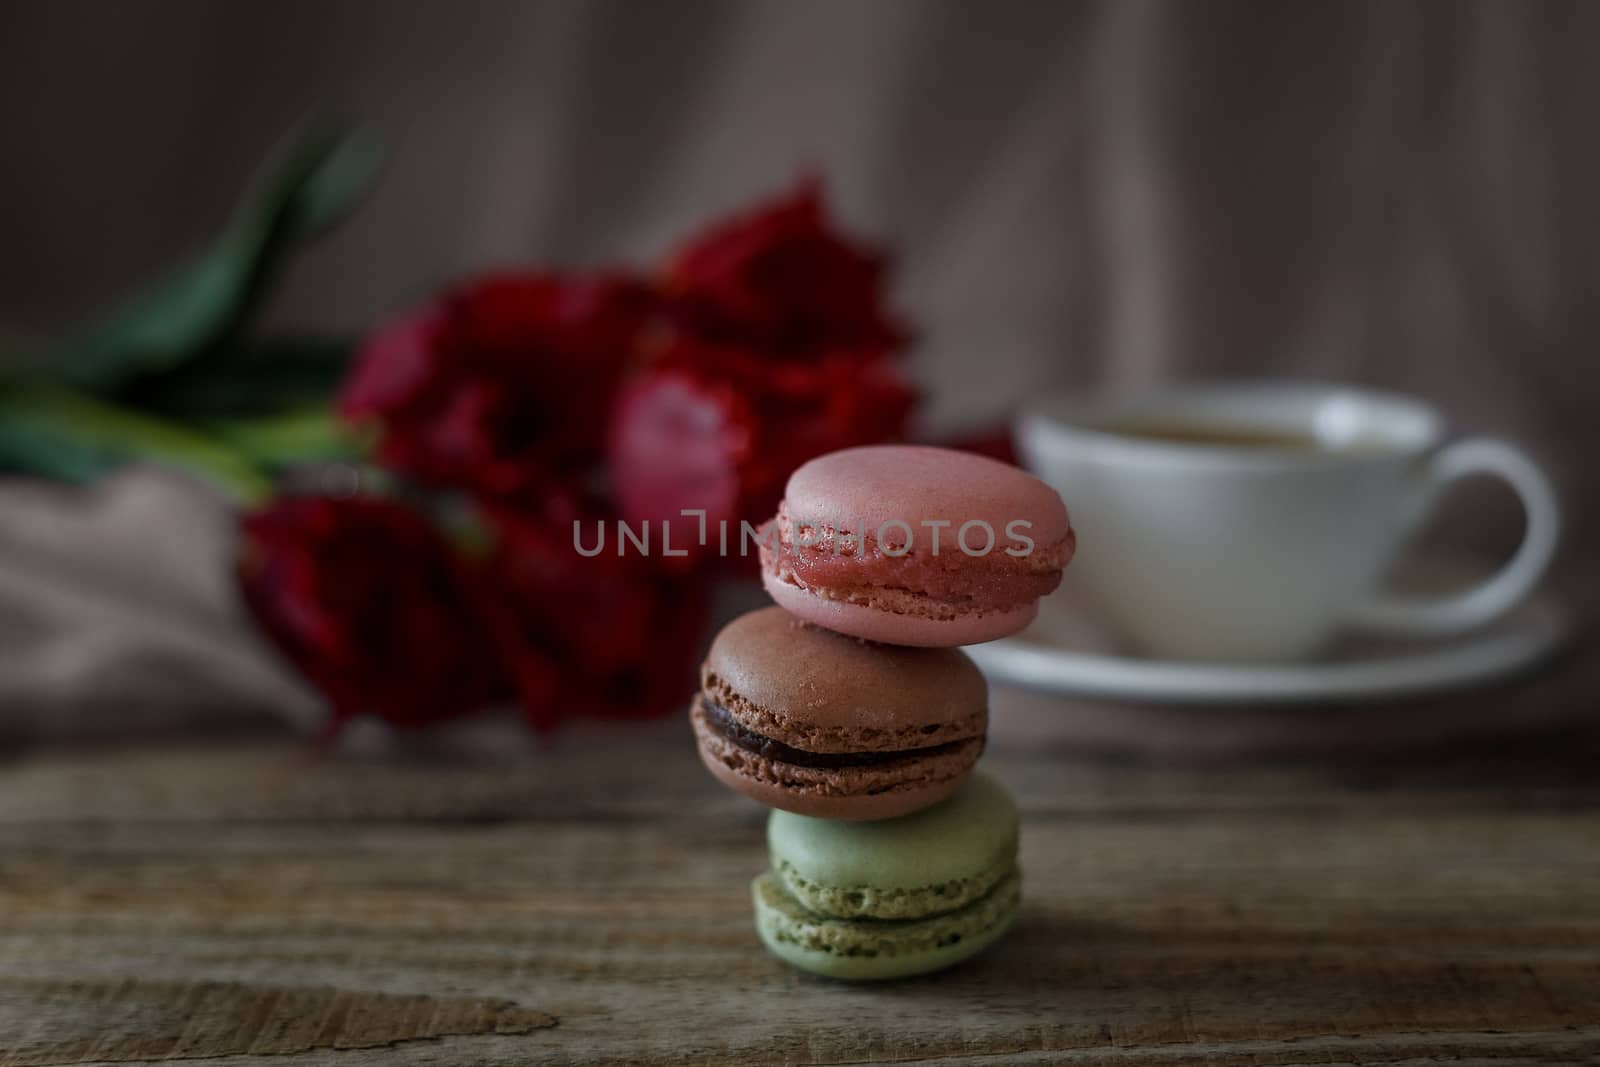 Macaroon biscuits on a wooden background with flowers and a cup of coffee